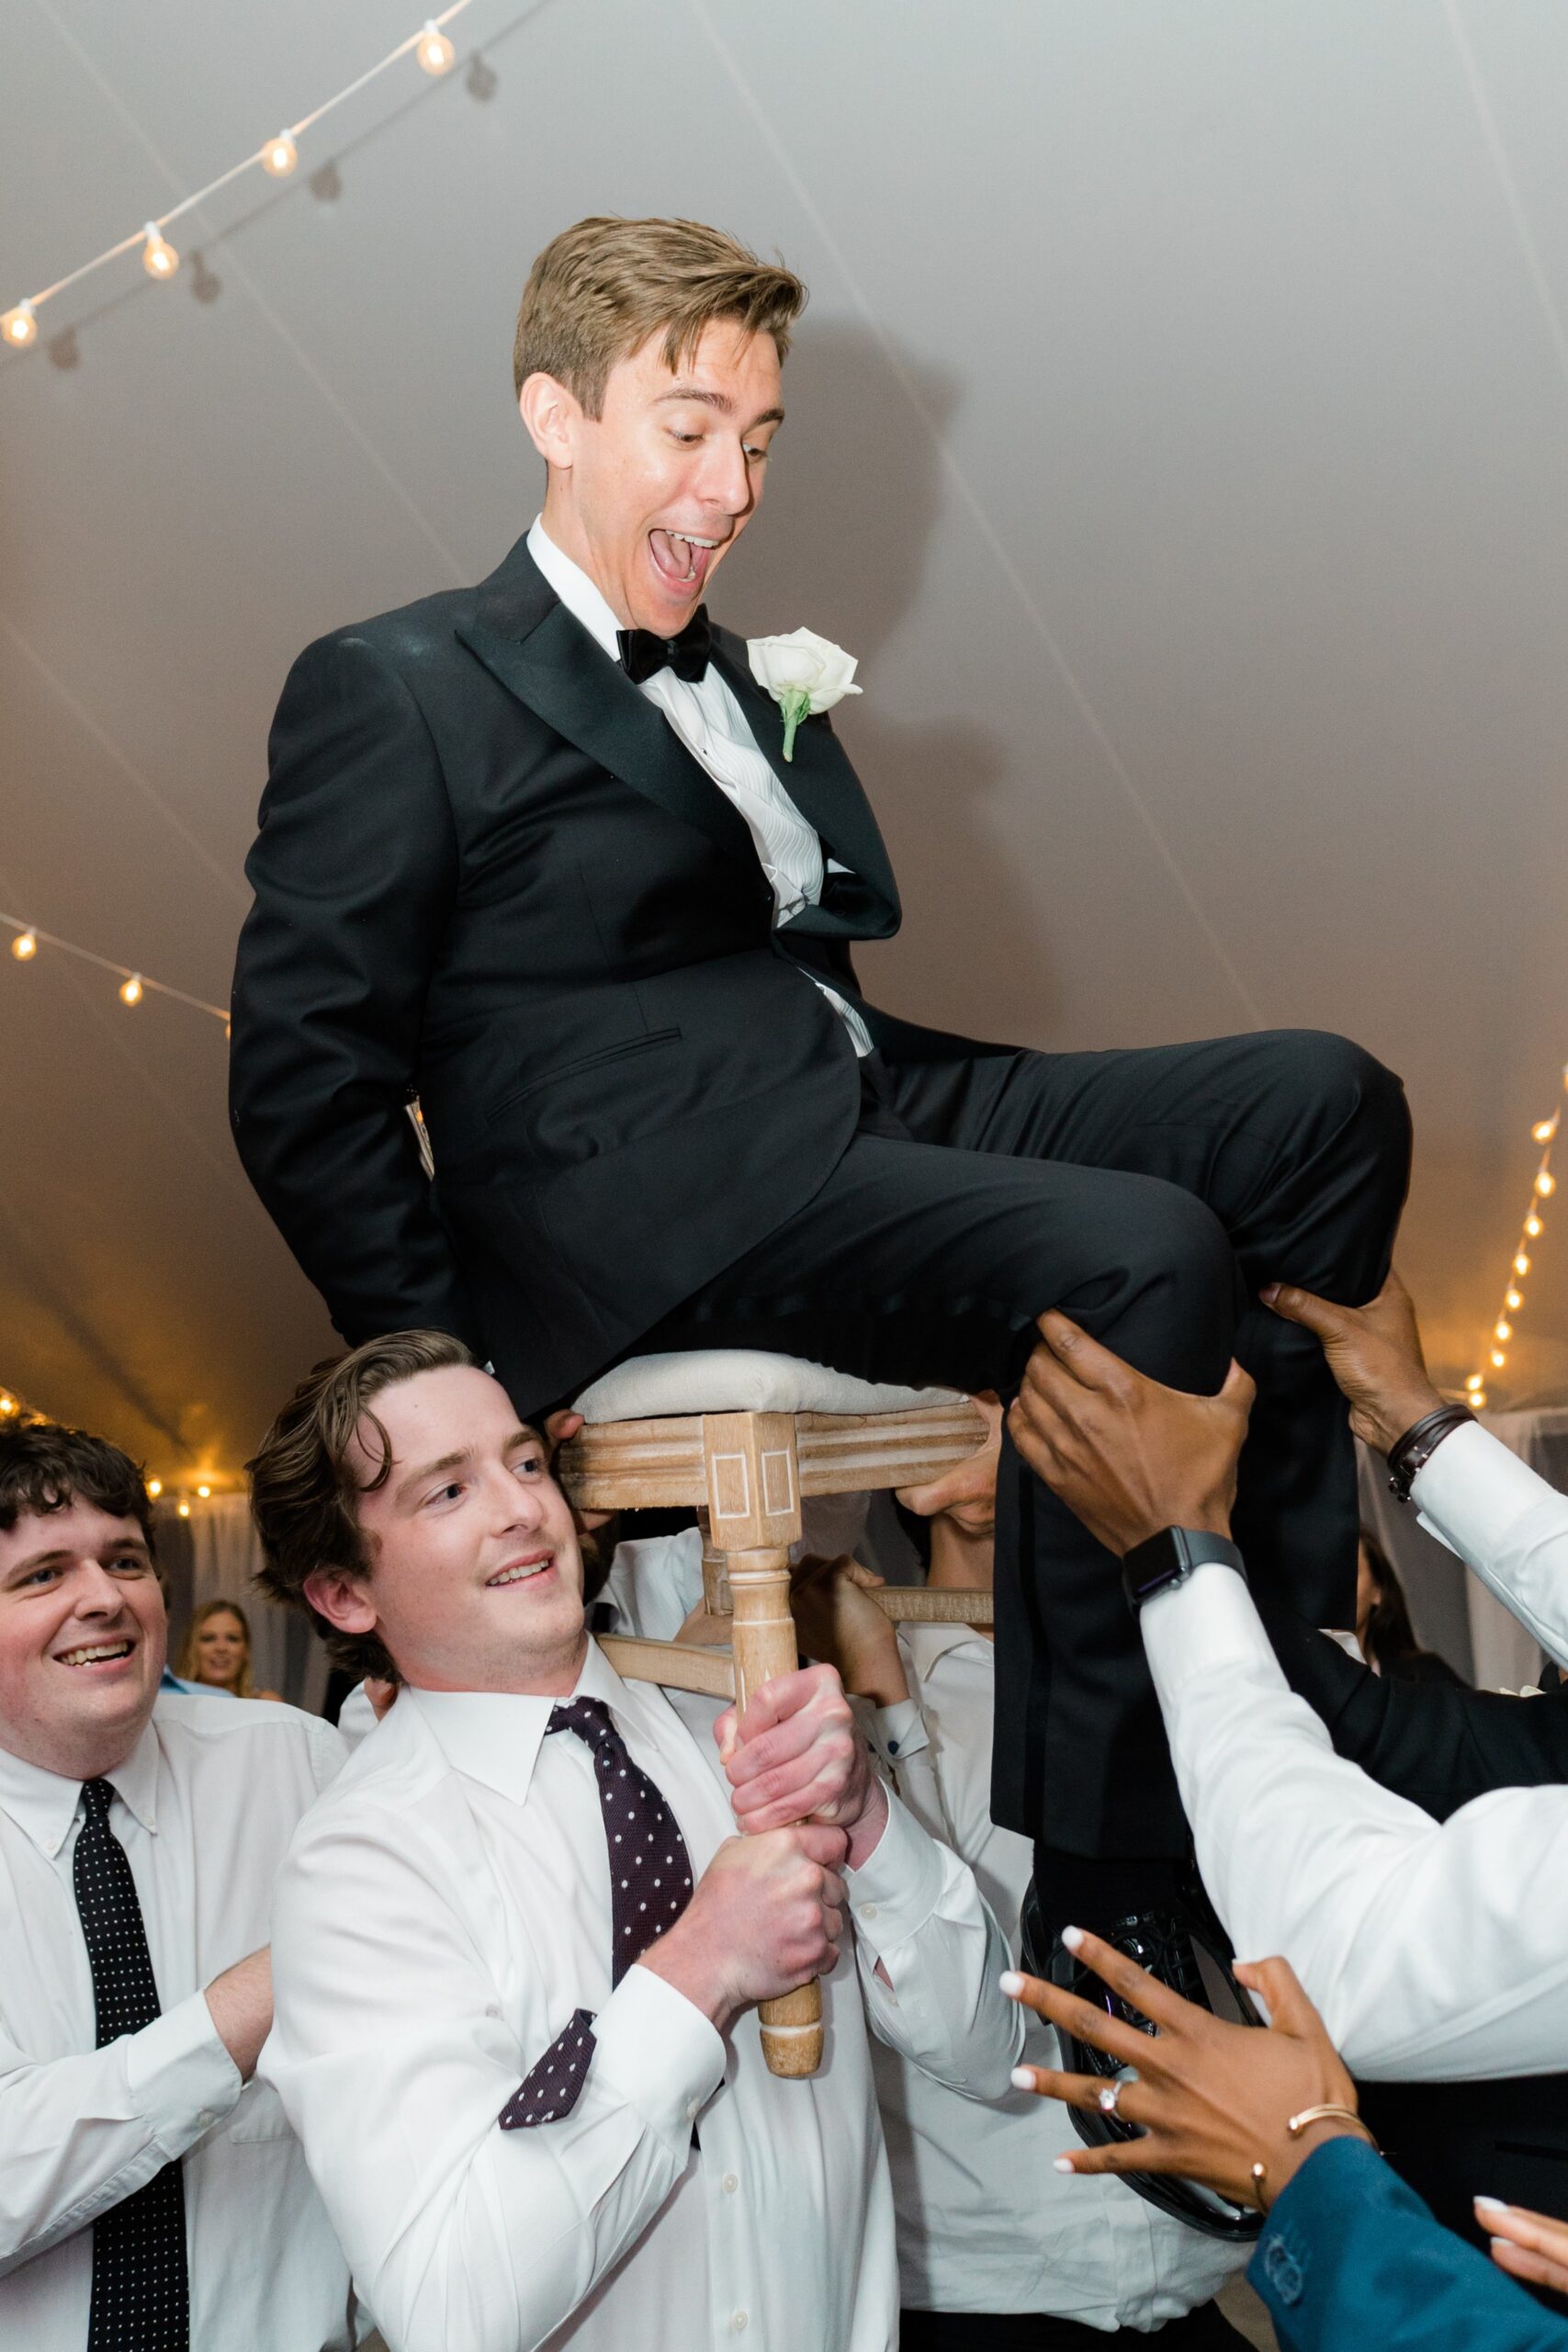 Groom gets picked up in chair during outdoor wedding reception in Boston.